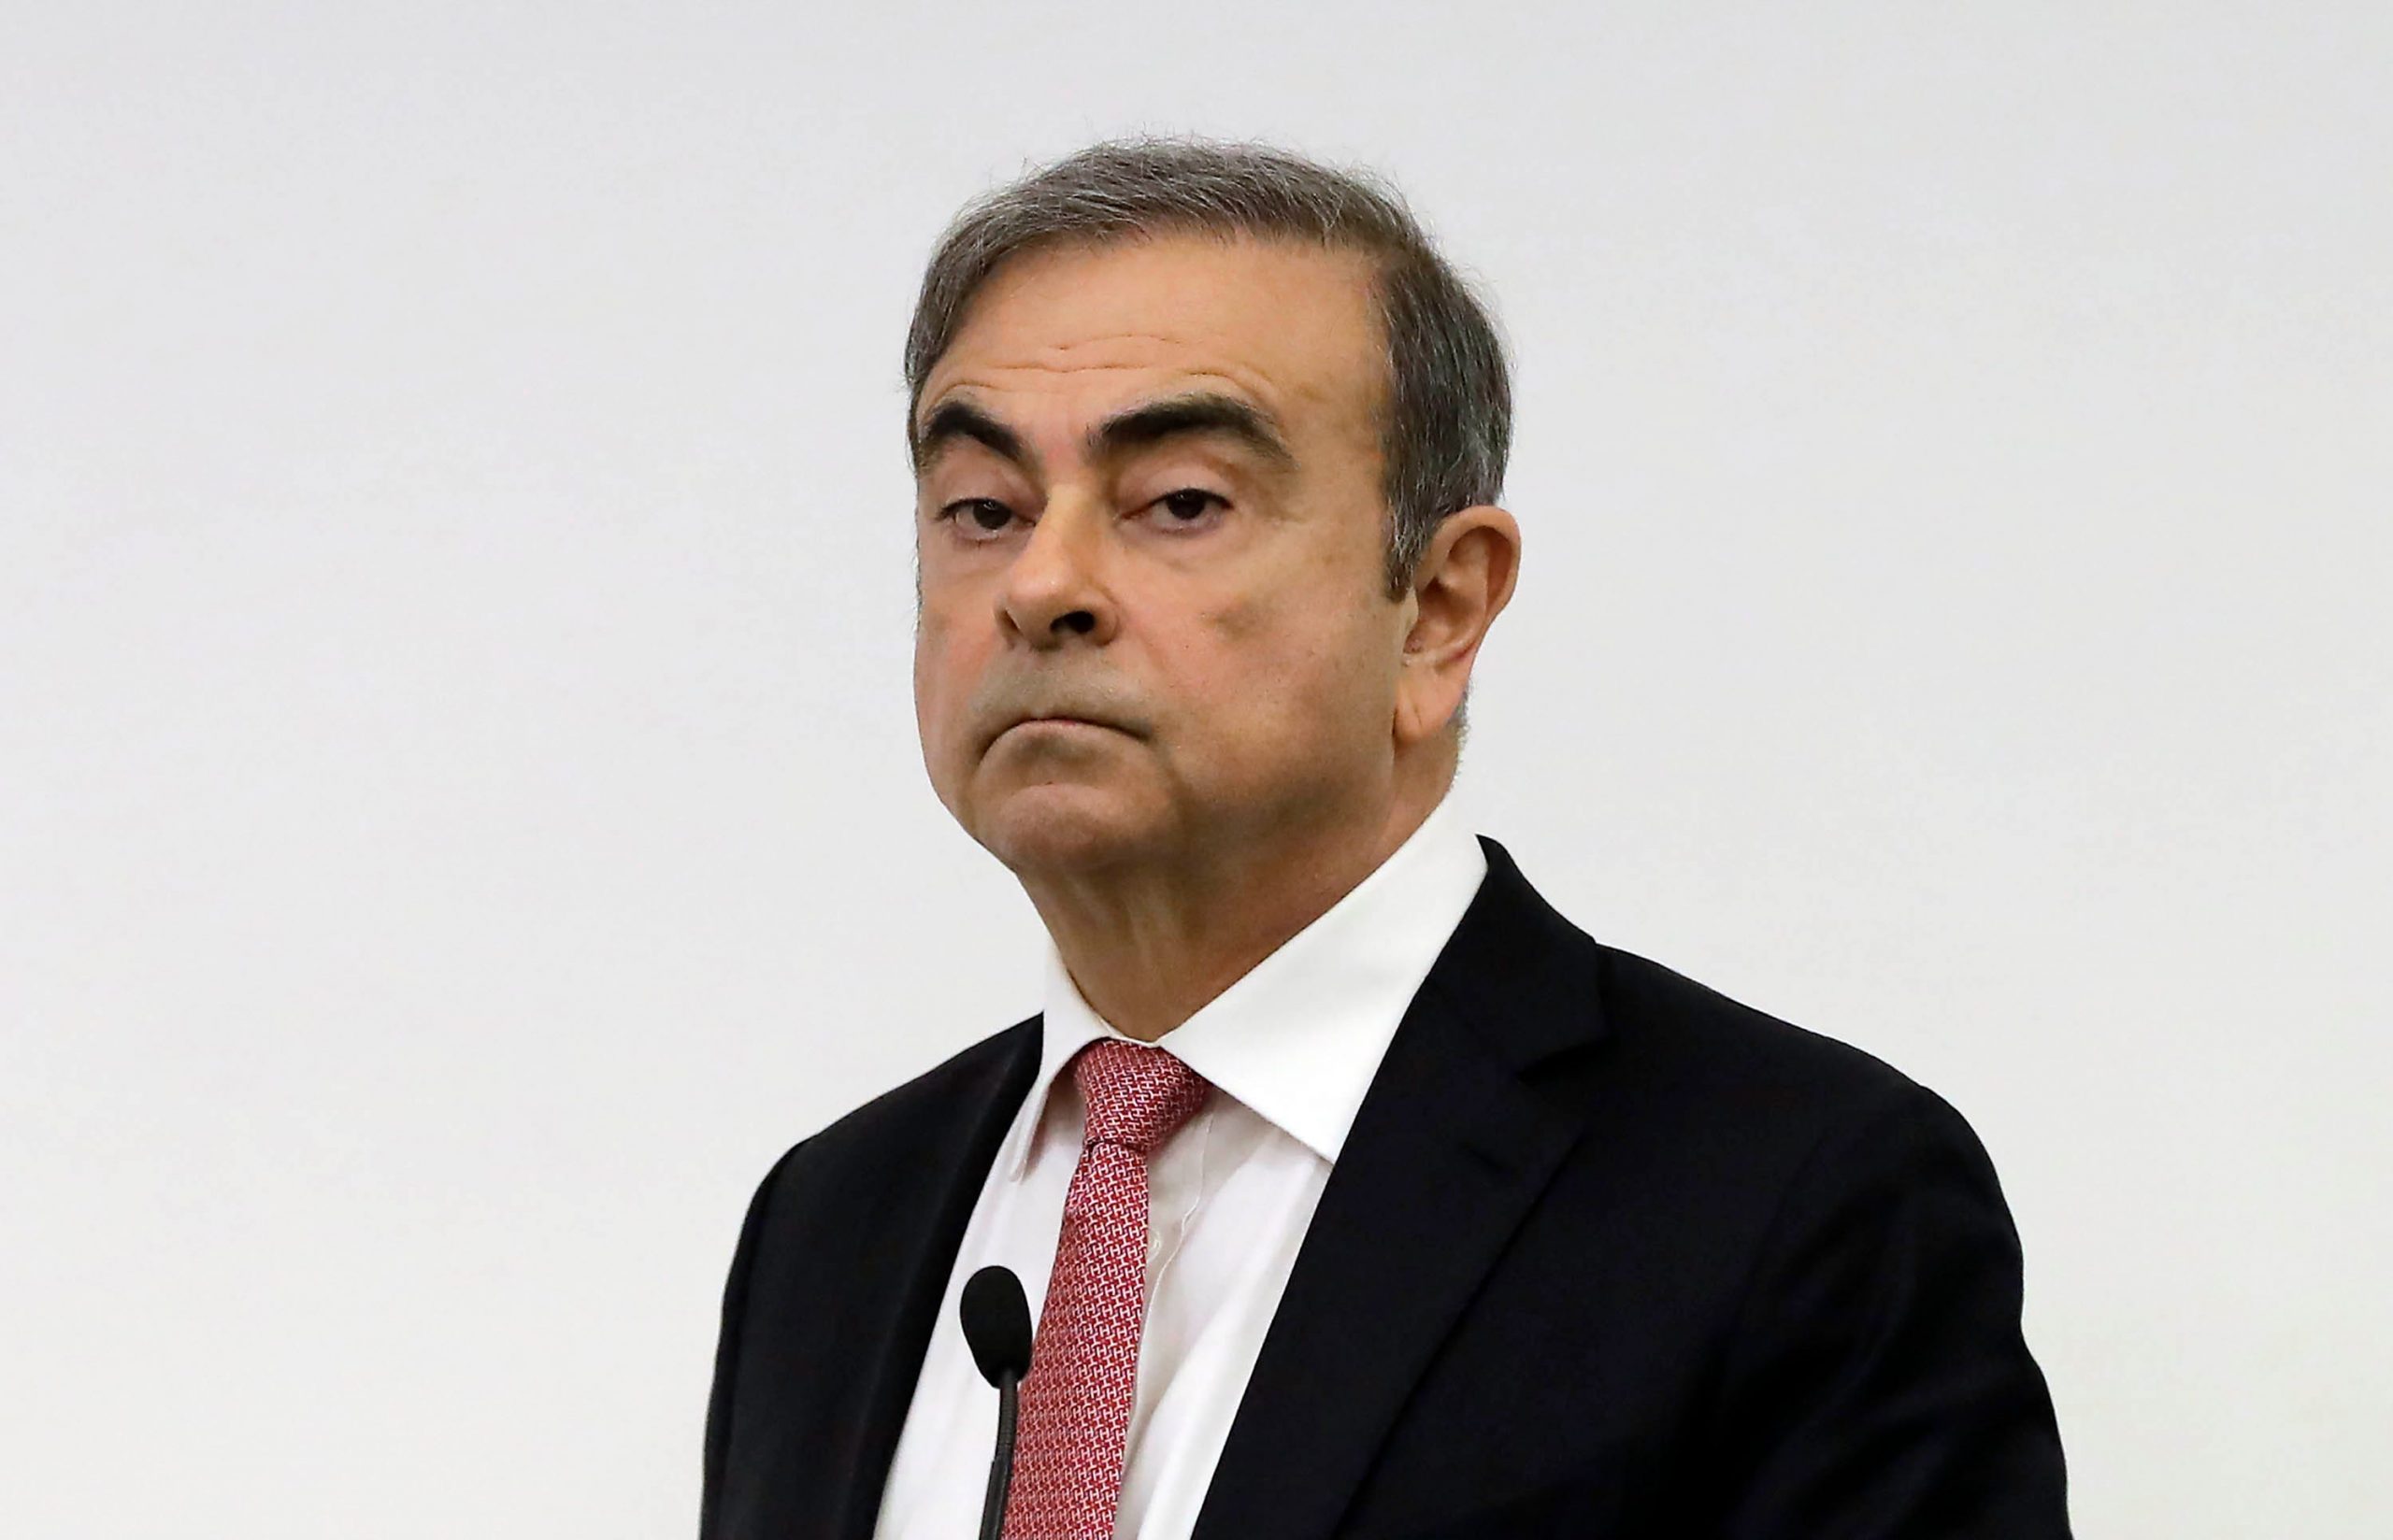 Former Nissan chairman Carlos Ghosn wears a black suit jacket, white shirt and pink tie.